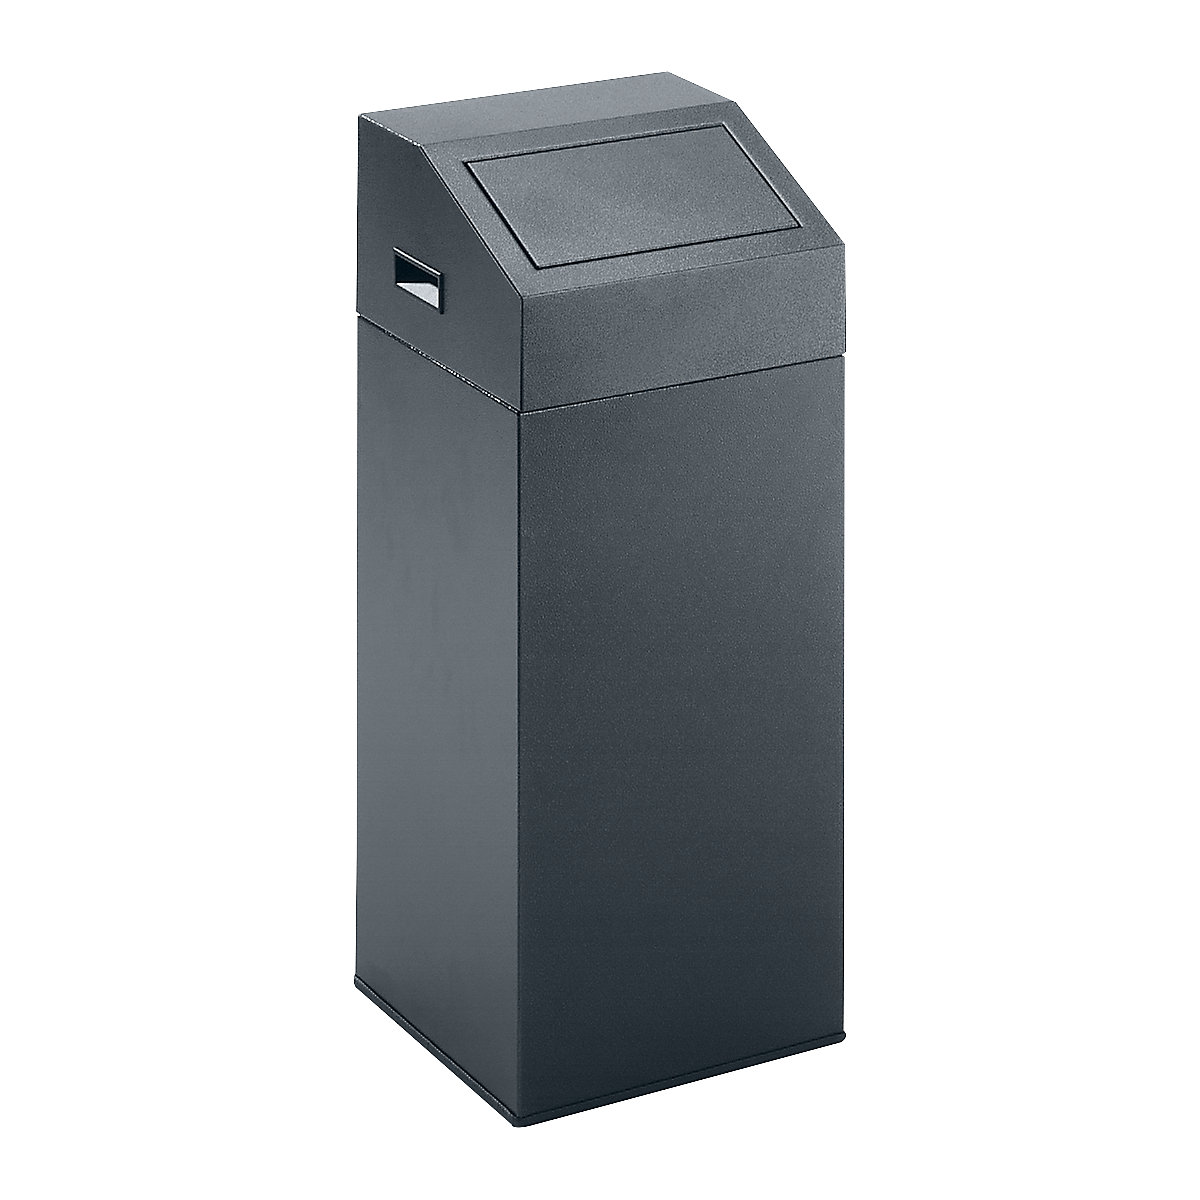 EUROKRAFTpro – Recyclable waste collector, capacity 45 l, WxHxD 320 x 790 x 320 mm, antique silver